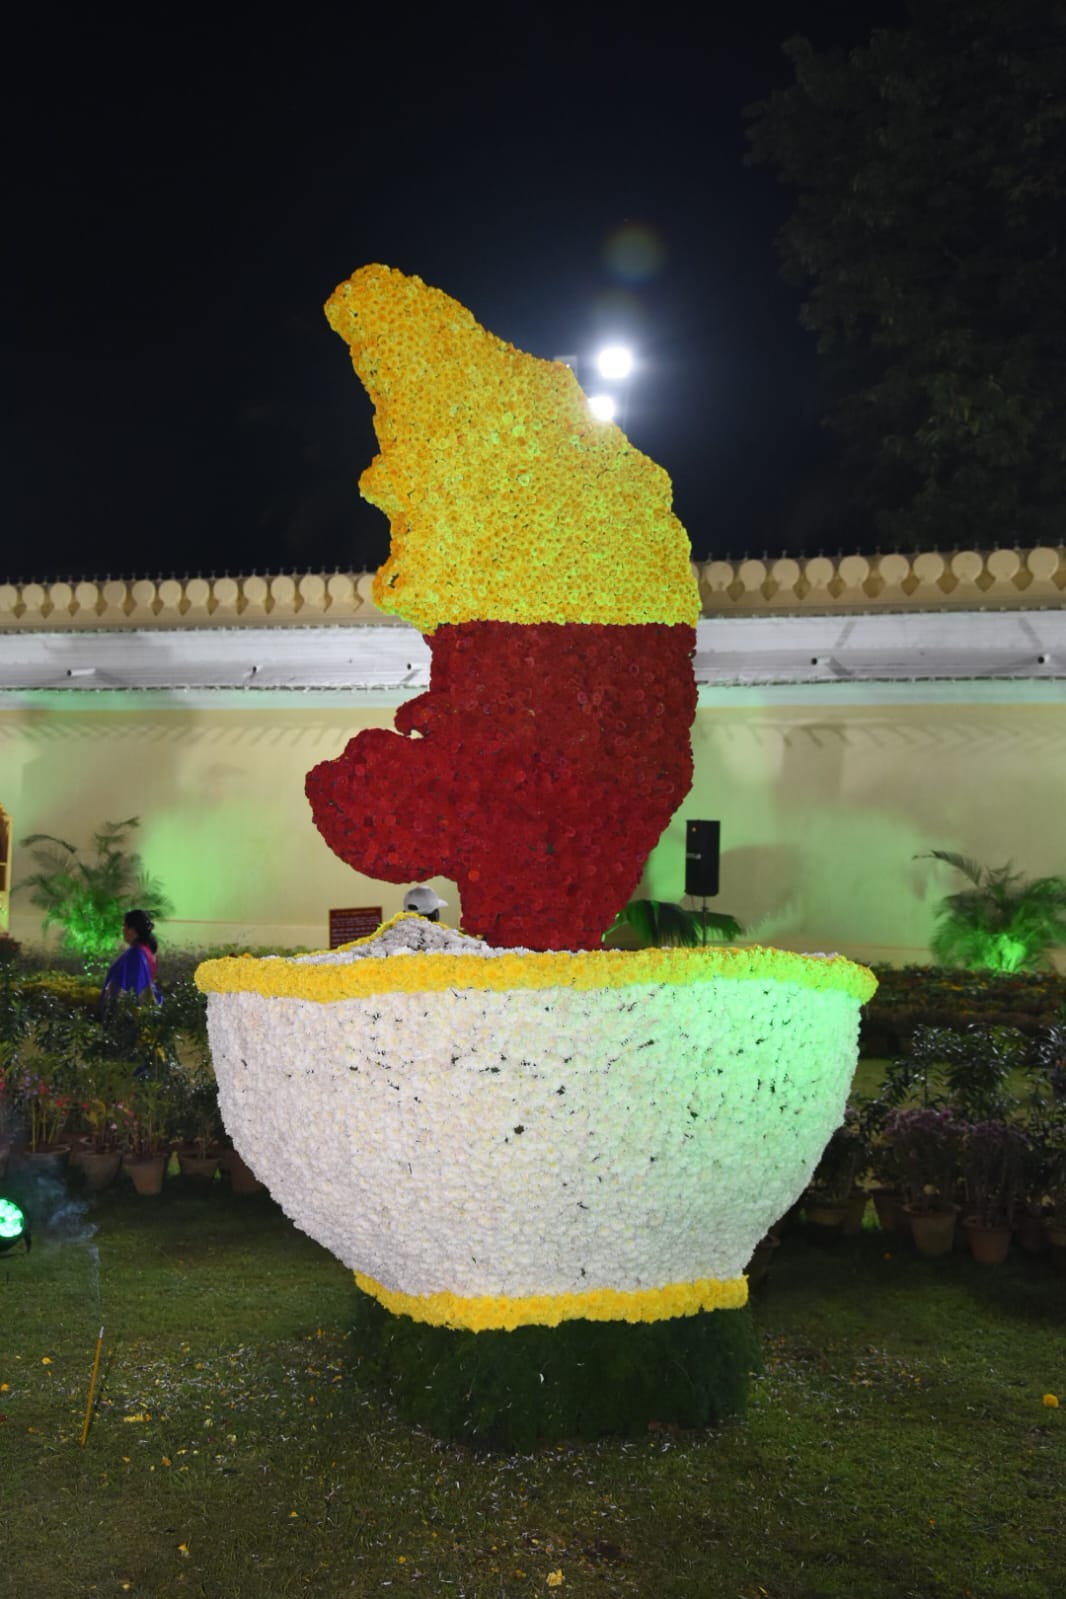 CM Siddaramaiah inaugurated the Palace Flower Show